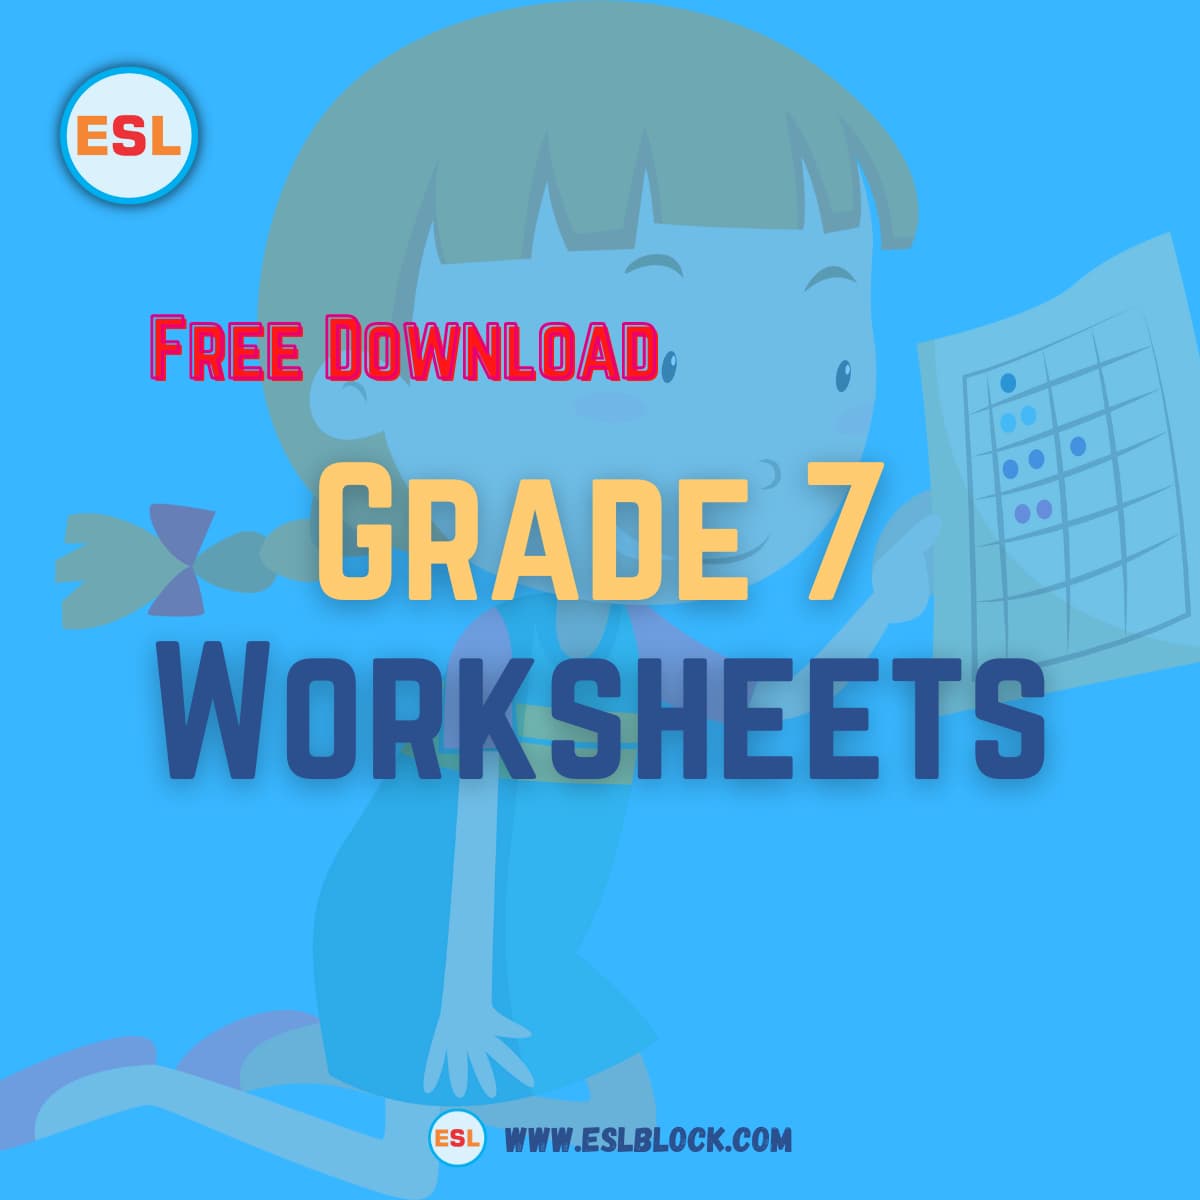 7th grade worksheets: As students enter 7th grade, they are expected to have a deeper understanding of various subjects, such as English, math, science, and social studies.